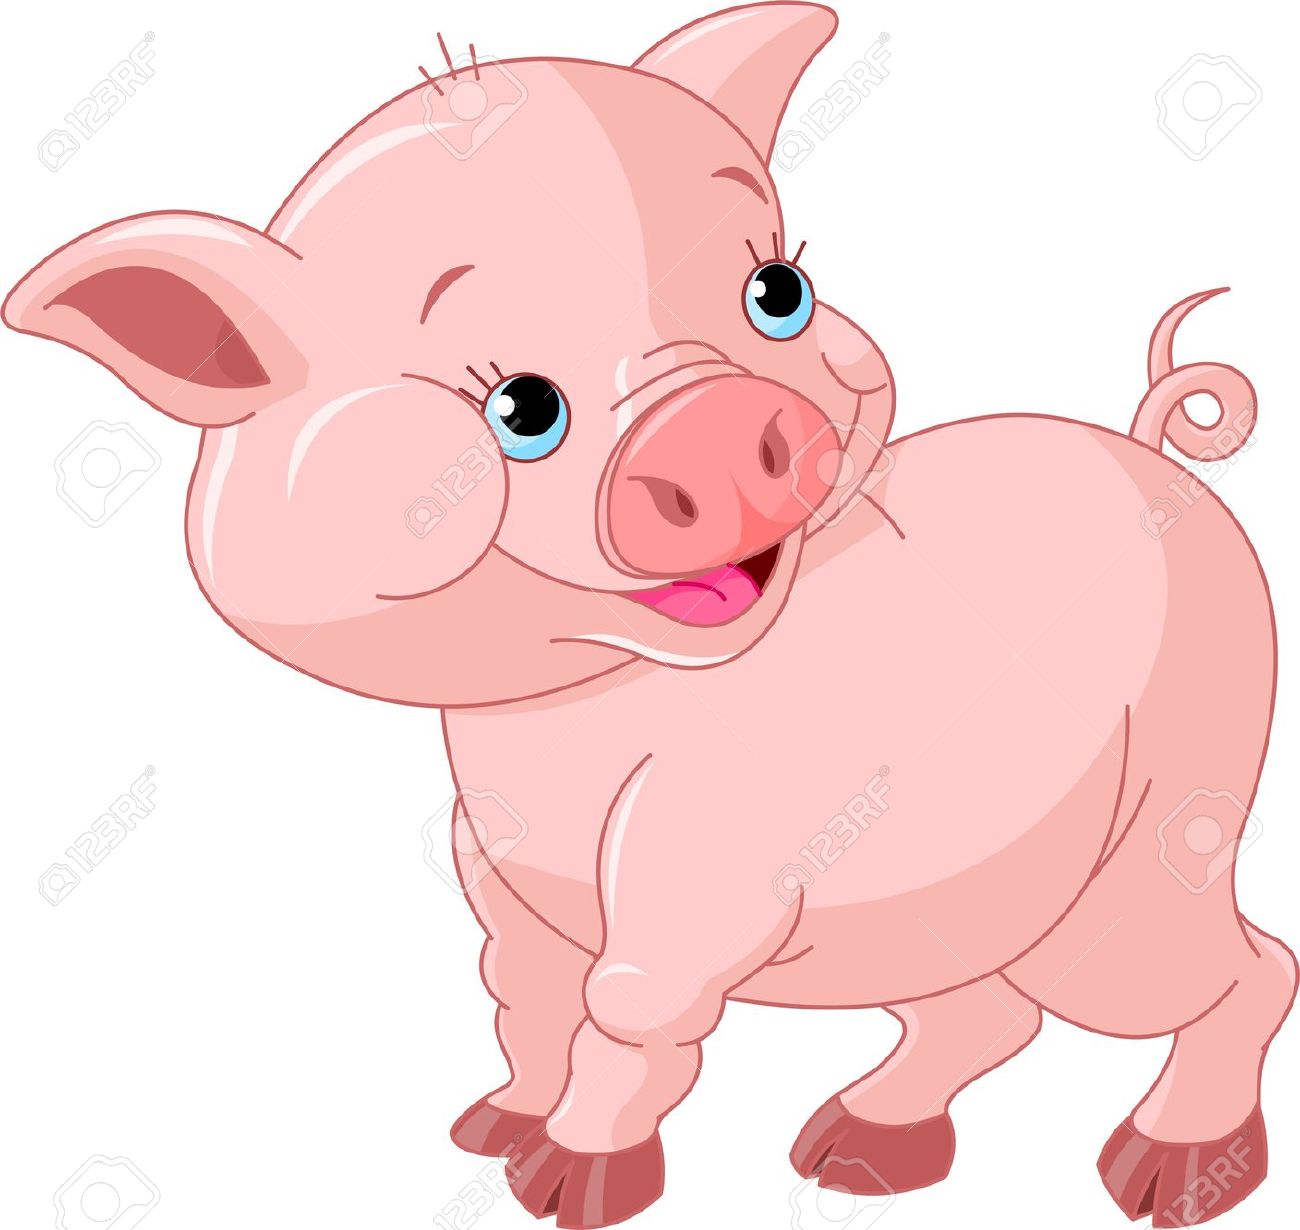 Baby pig clipart